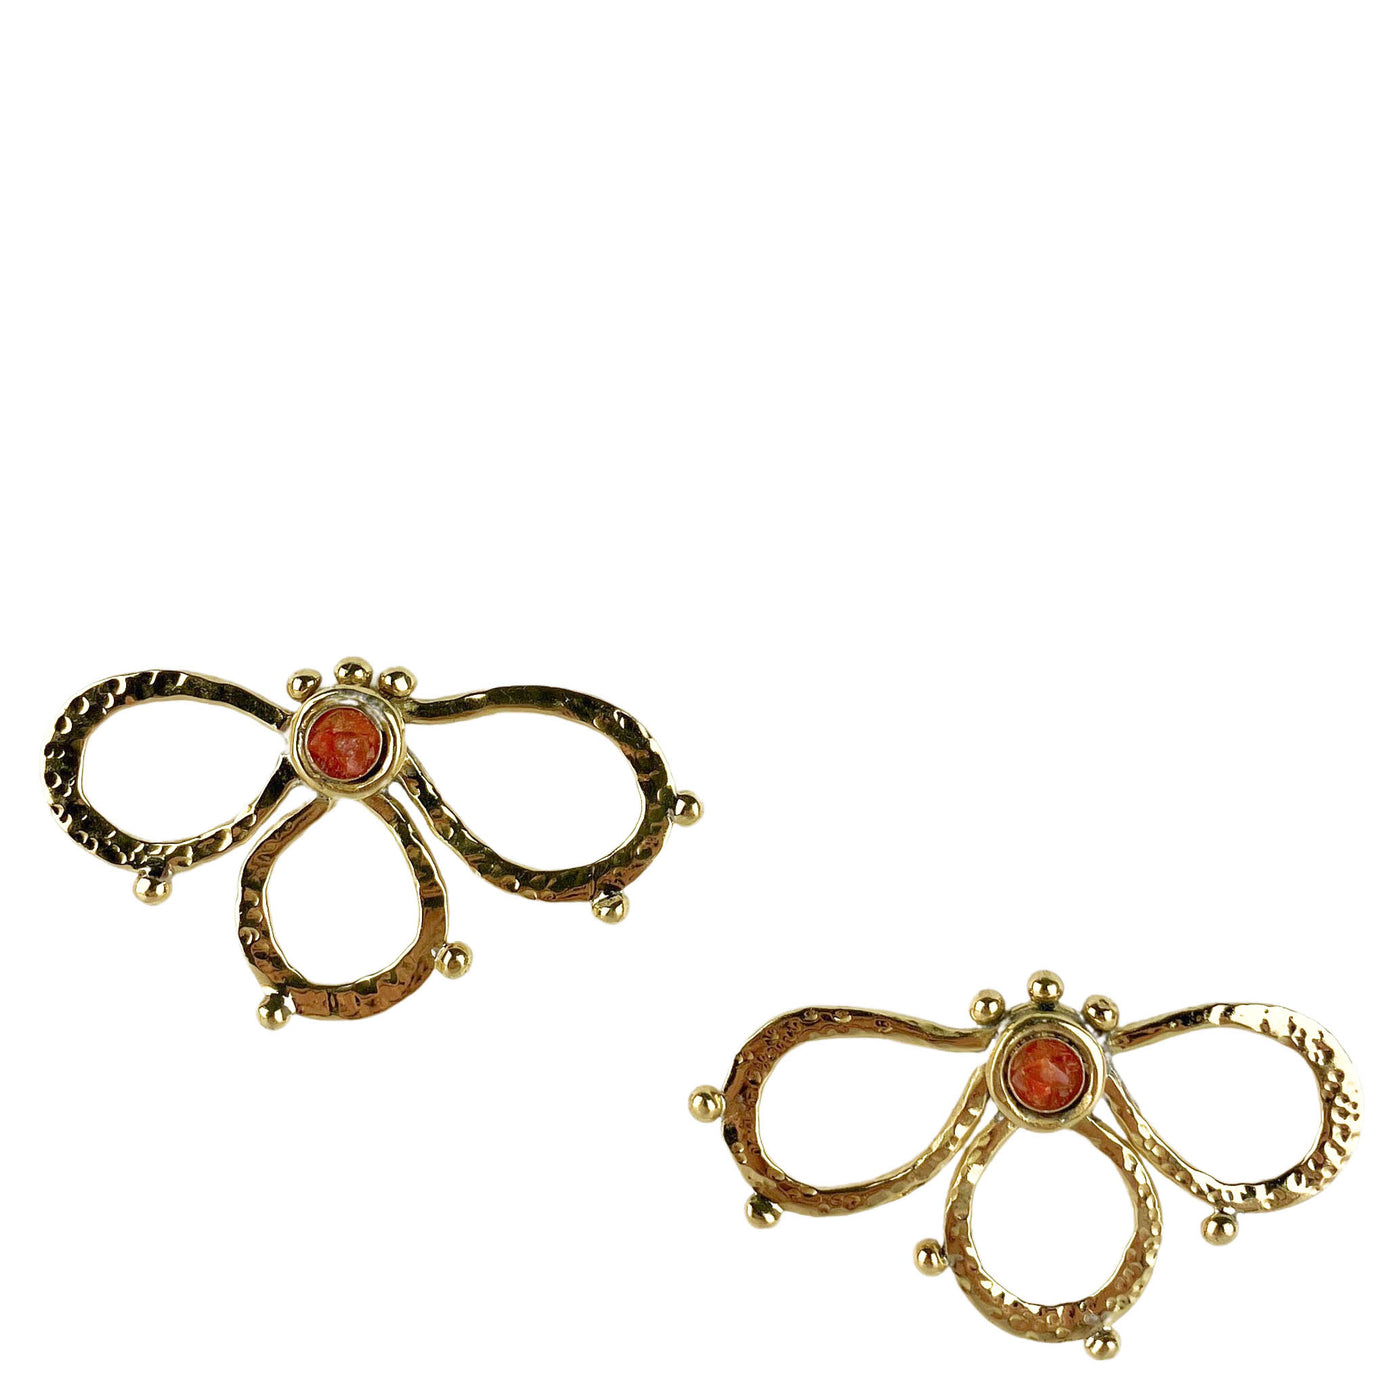 Ulla Johnson Hammered Chain Flower Stud Earrings in Tiger's Eye - Discounts on Ulla Johnson at UAL